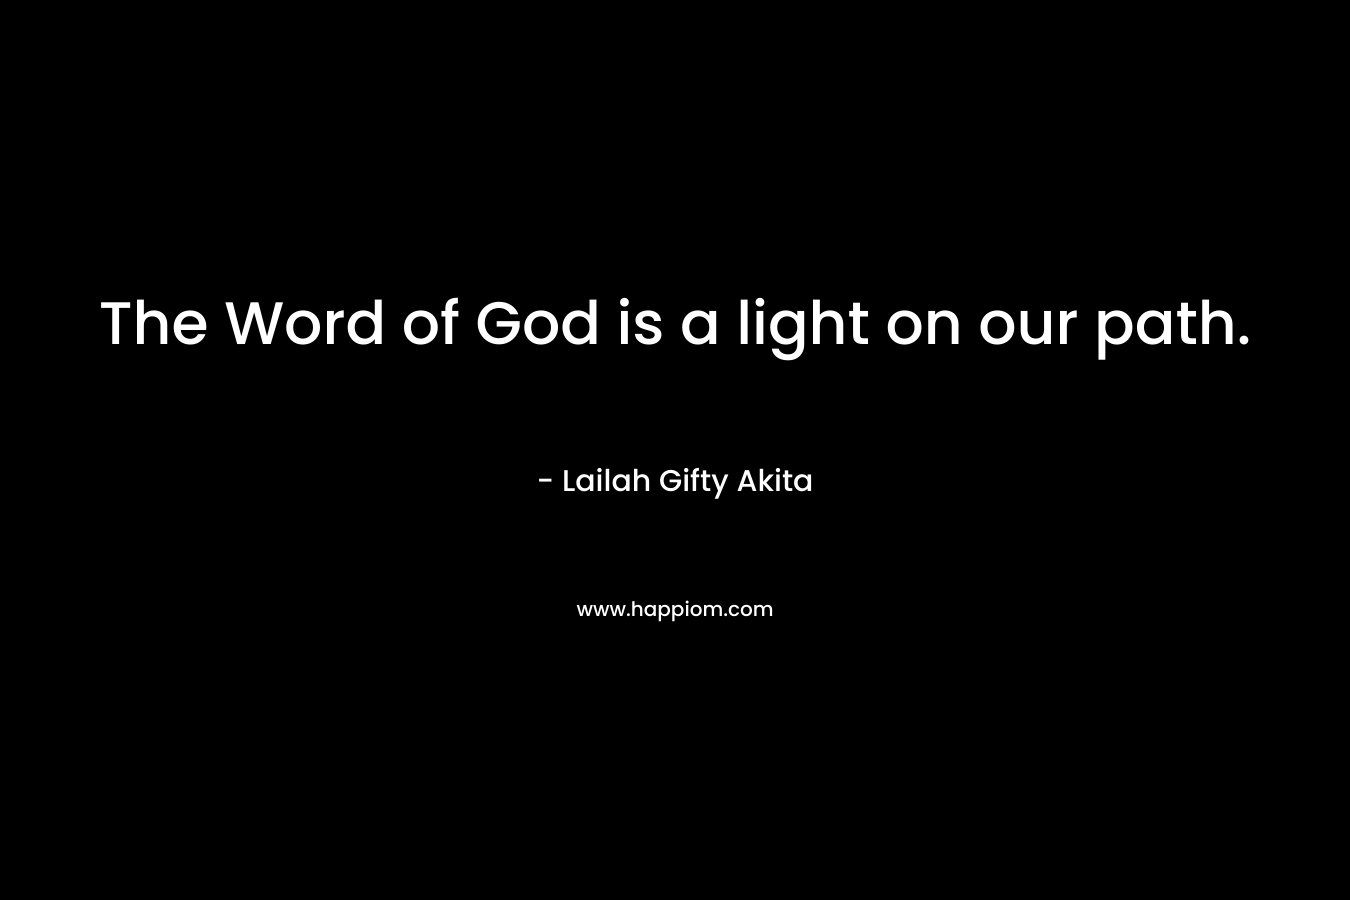 The Word of God is a light on our path.